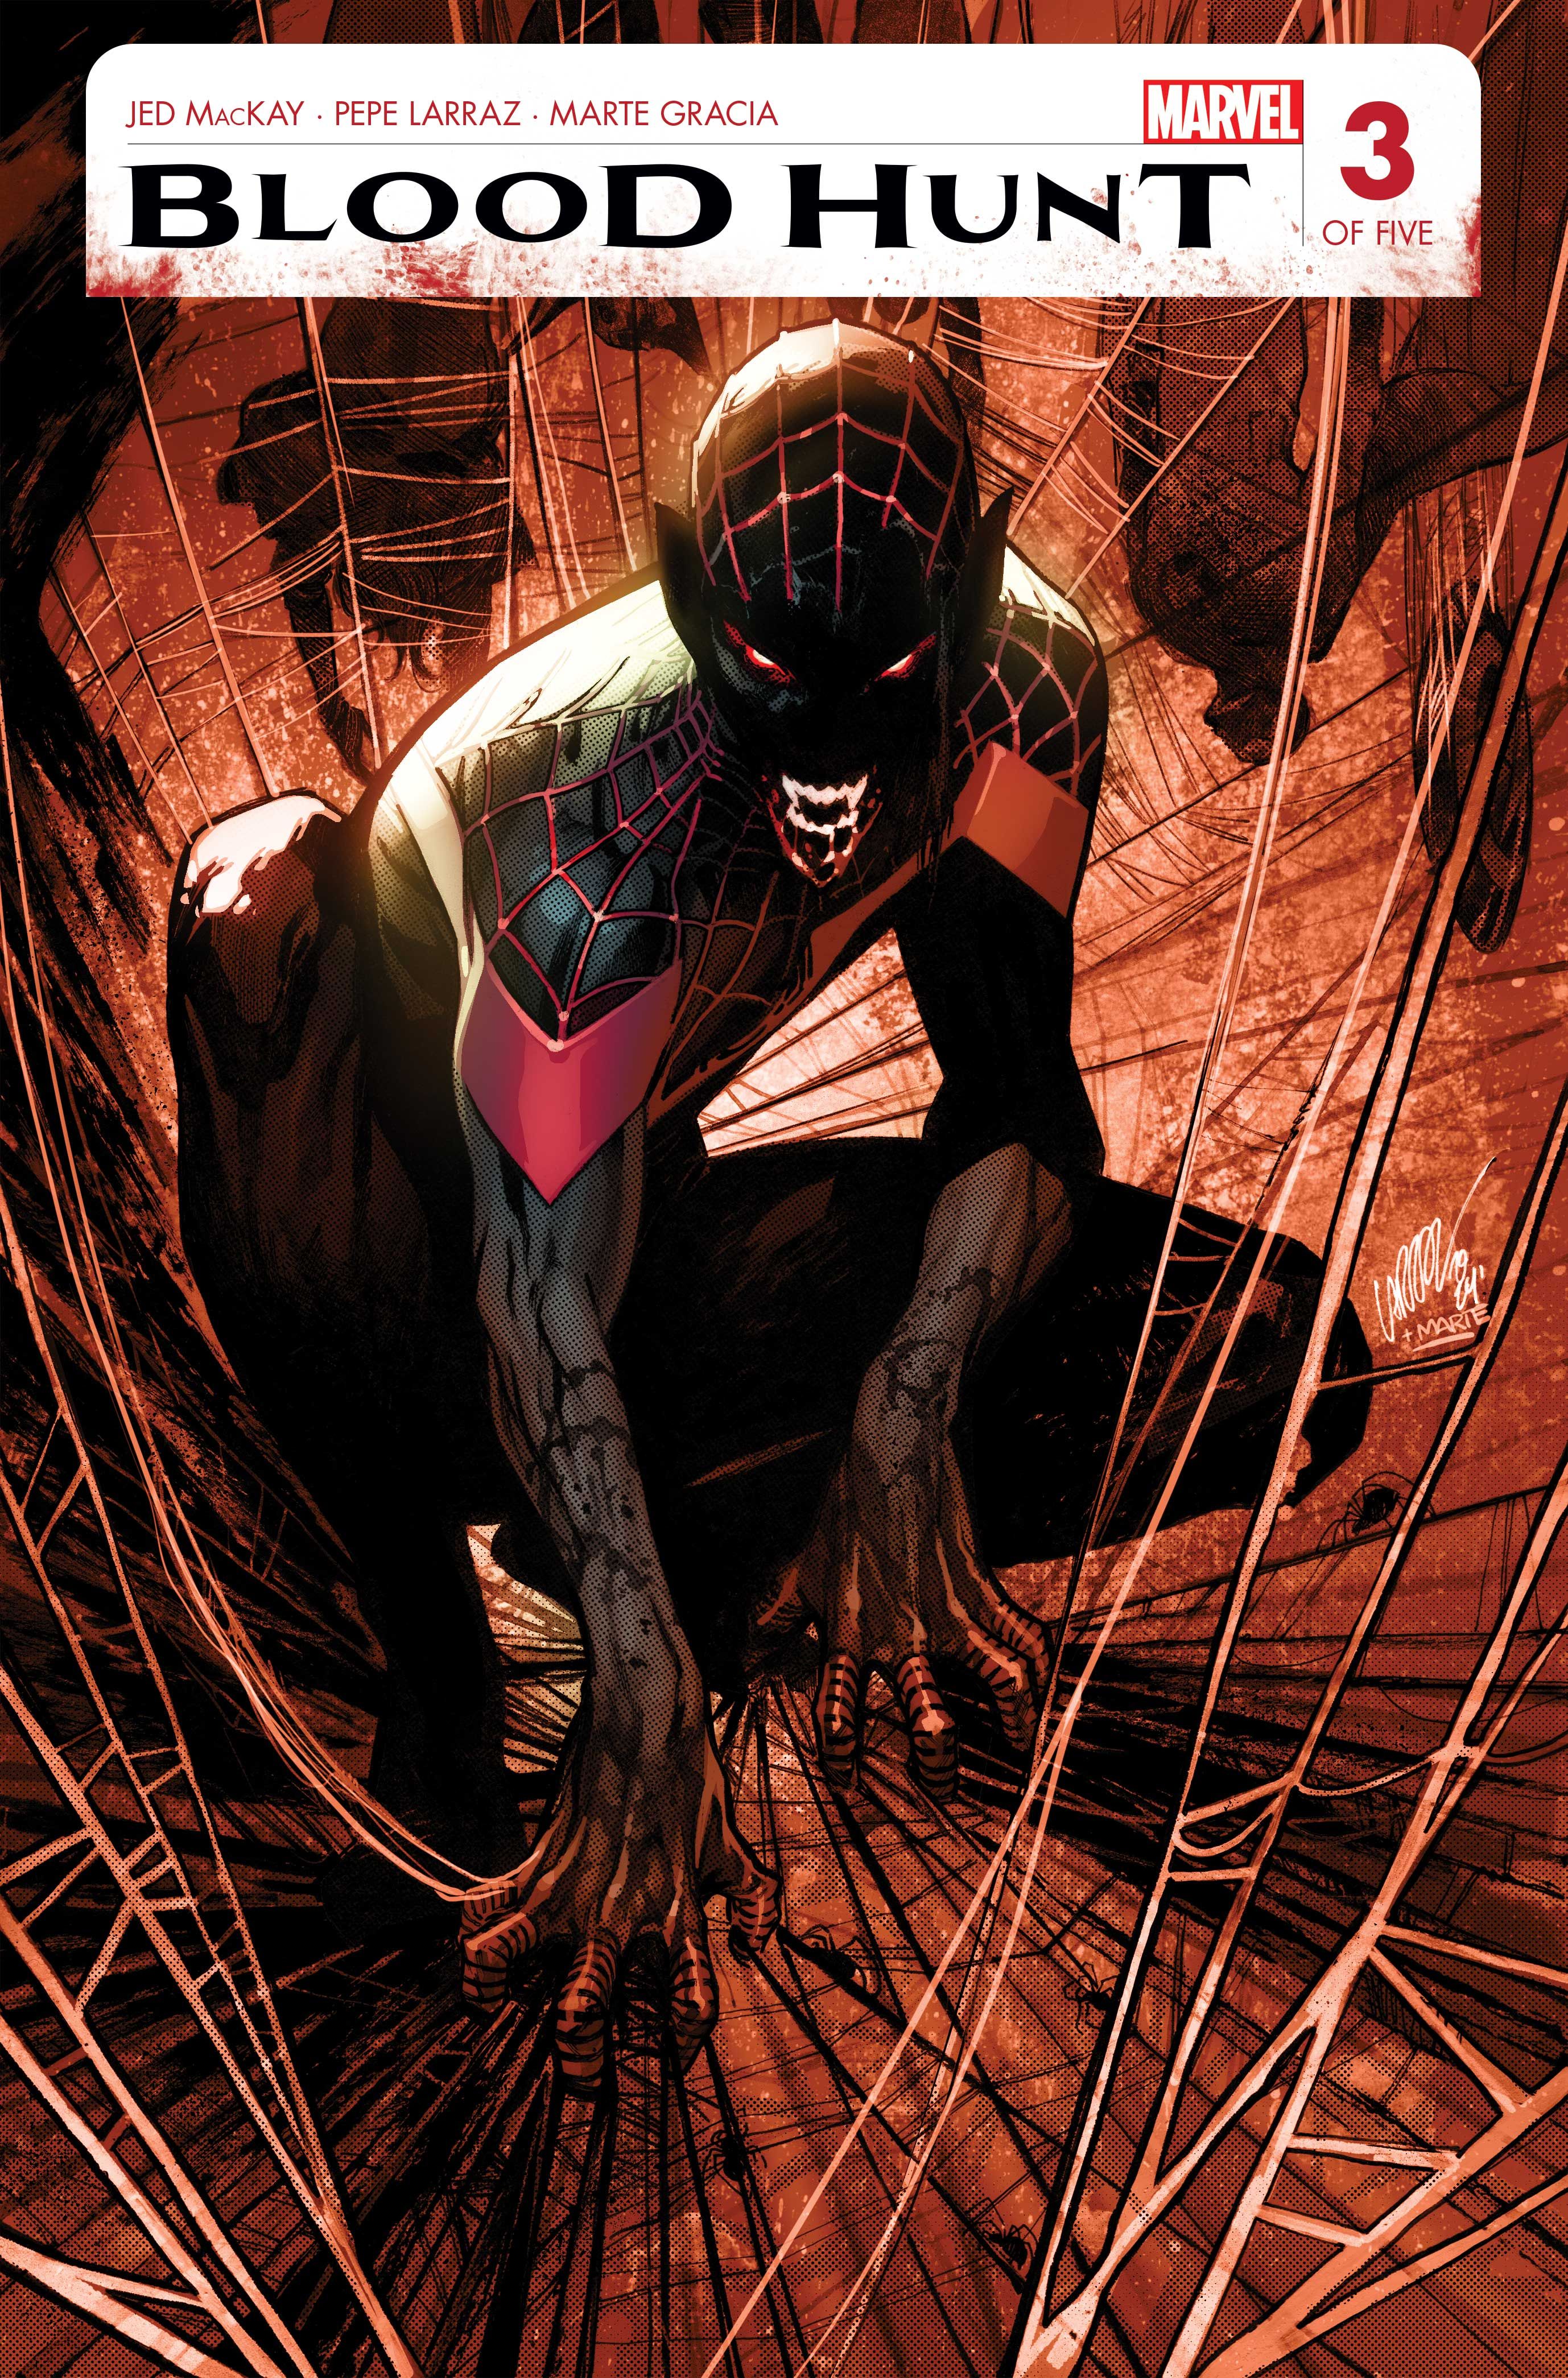 Miles Morales’ Spider-Man Gets Terrifying Redesign as a Marvel Villain